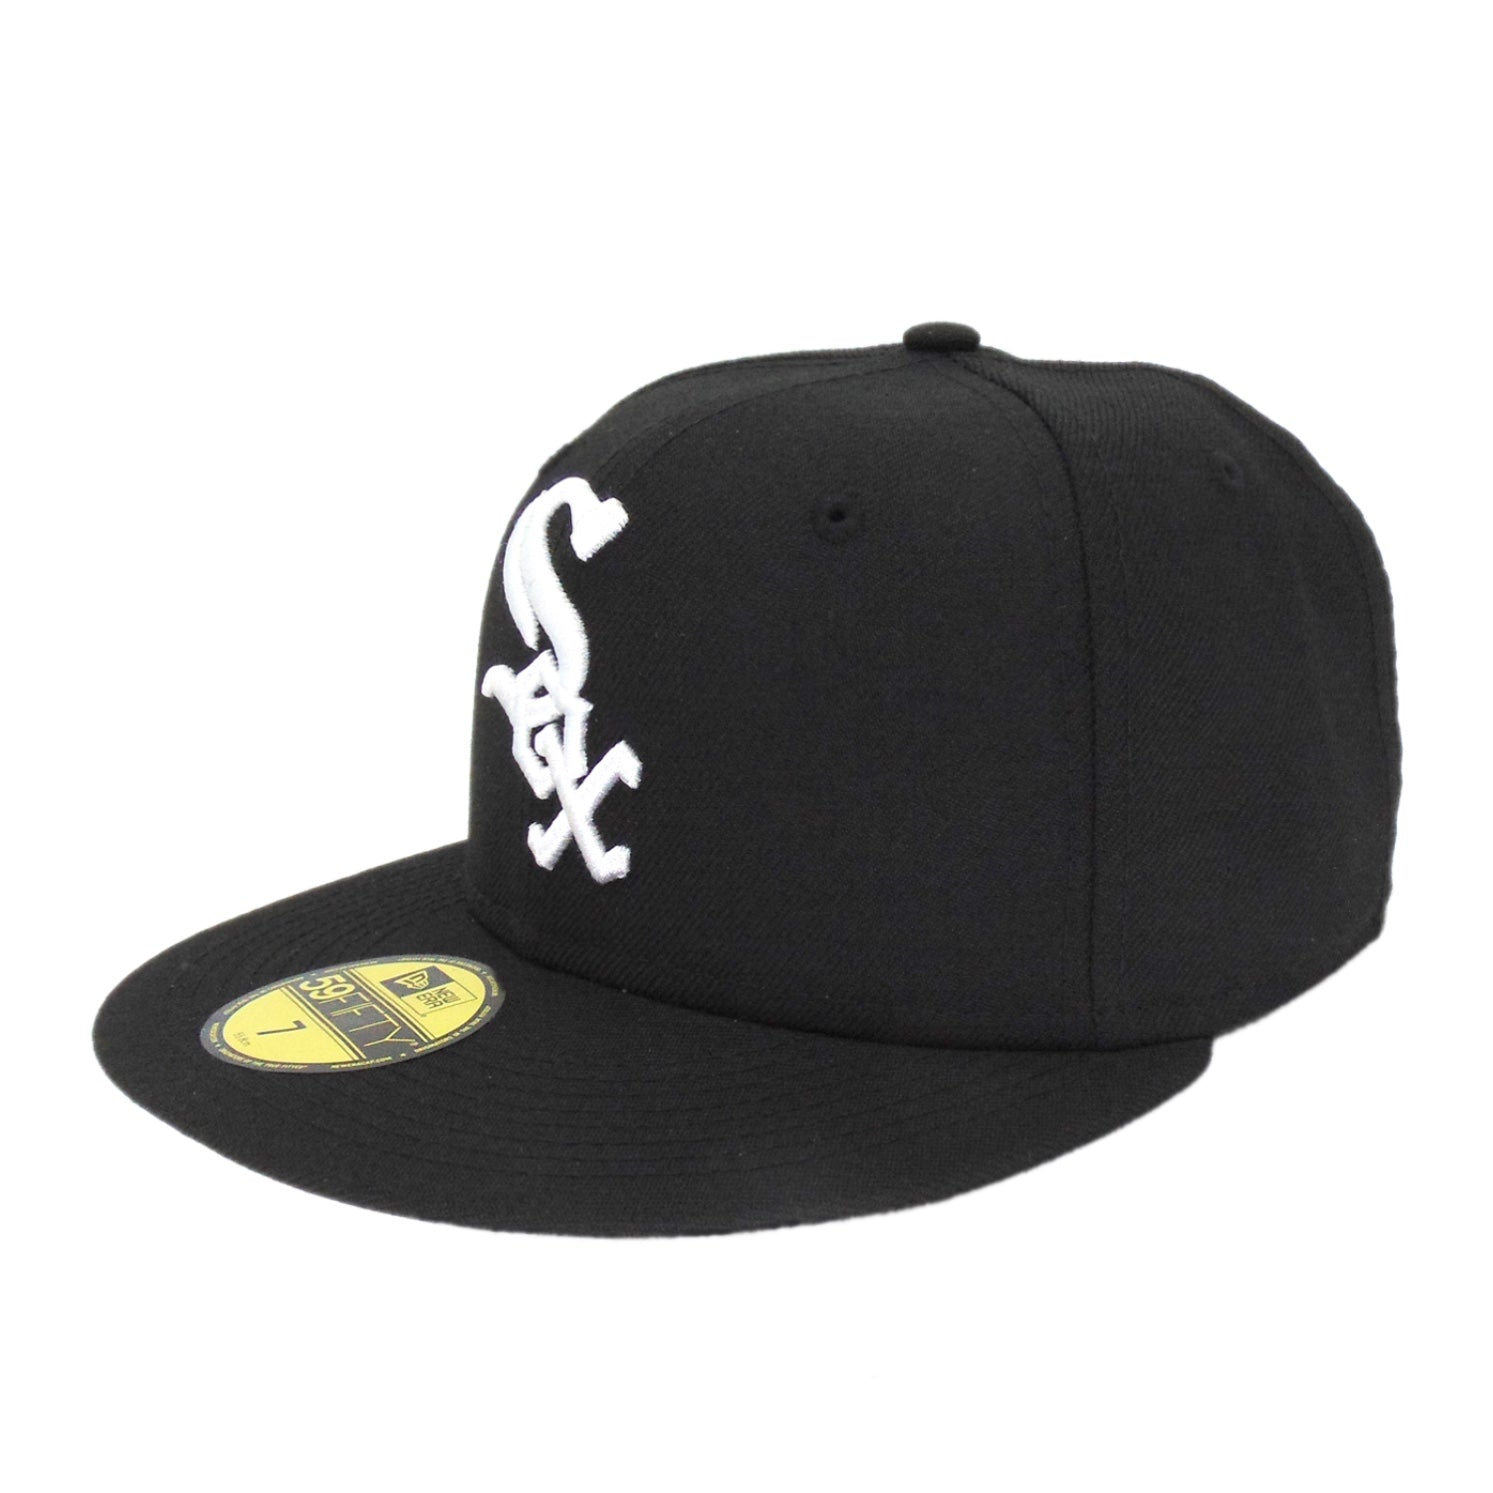 New Era White Sox Fitted Black 11941909